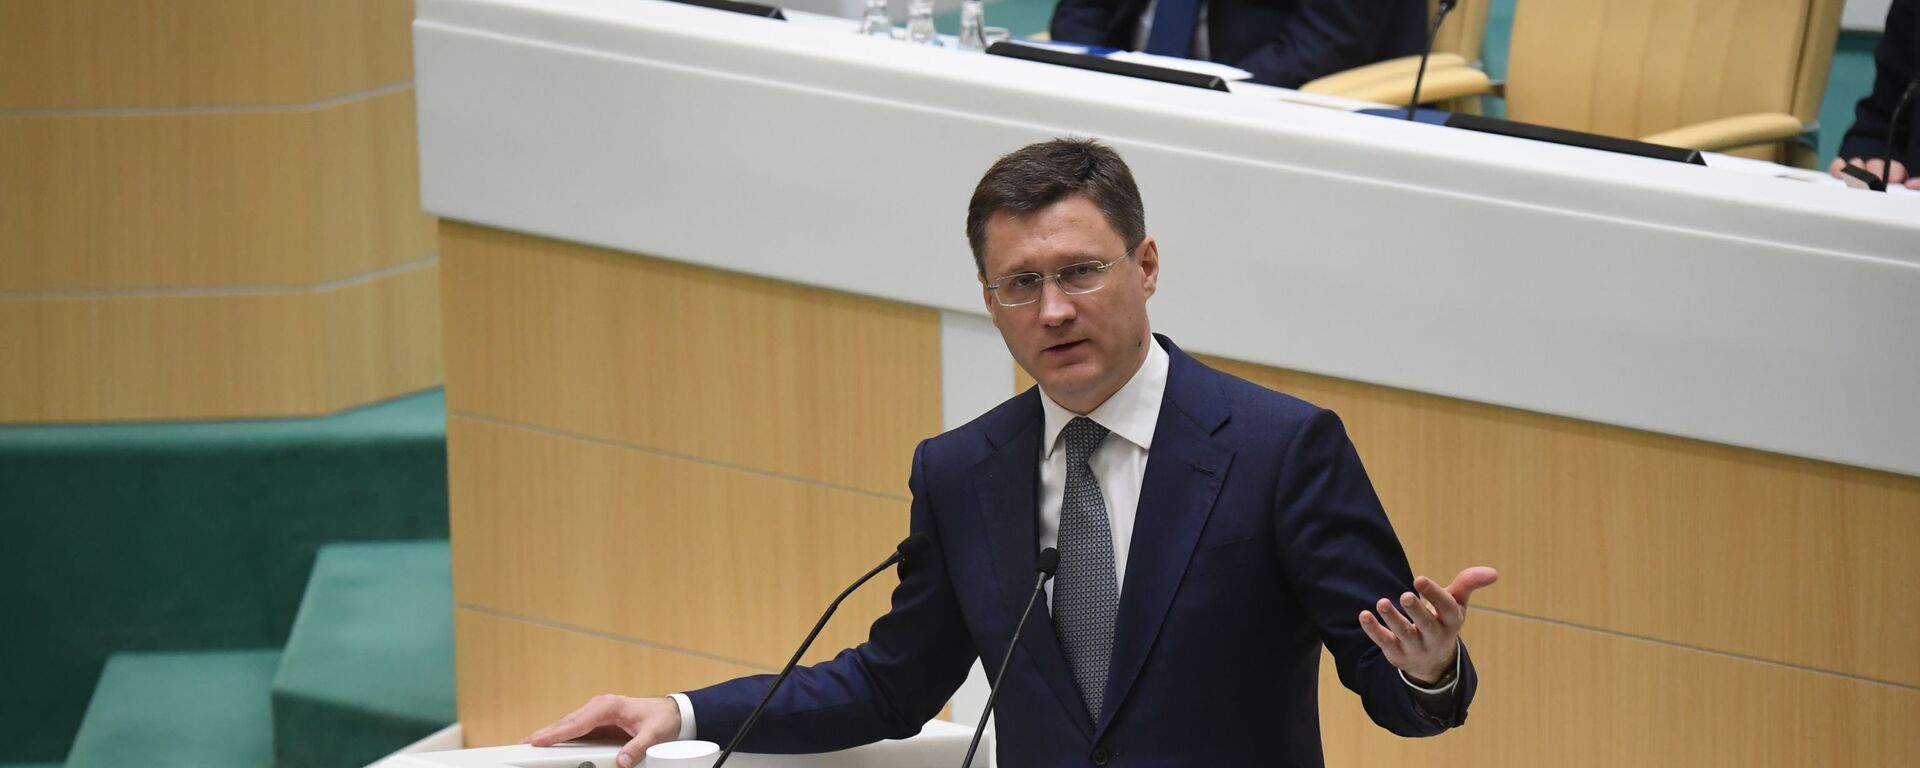 Russian Energy Minister Alexander Novak speaks during the meeting of the Federation Council of Russia, 11 March 2020 - Sputnik International, 1920, 11.10.2023